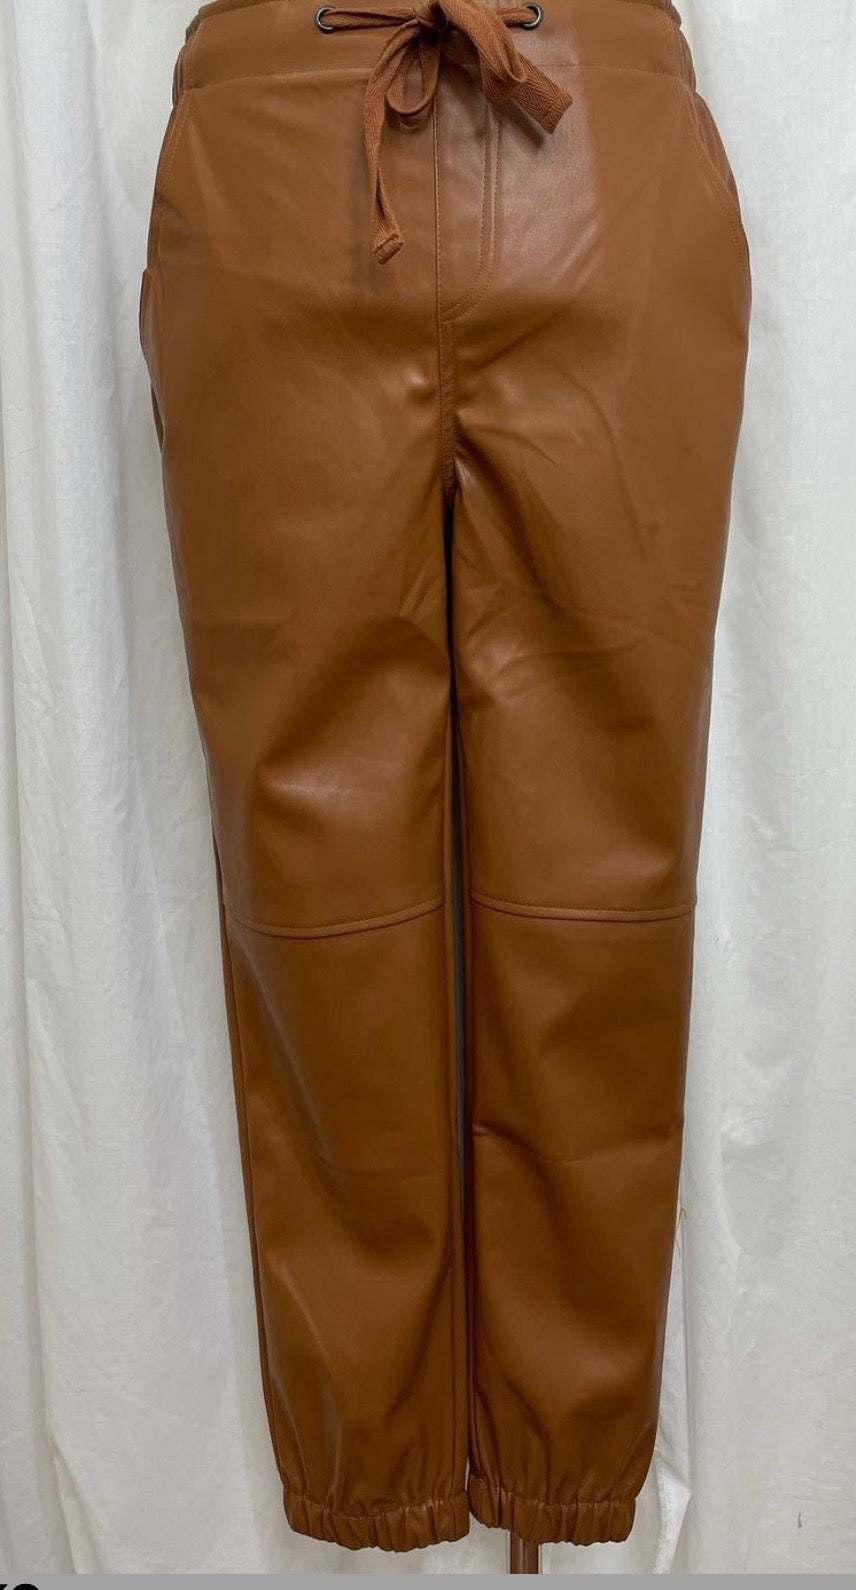 Coco Leather Pants by Sunny Girl